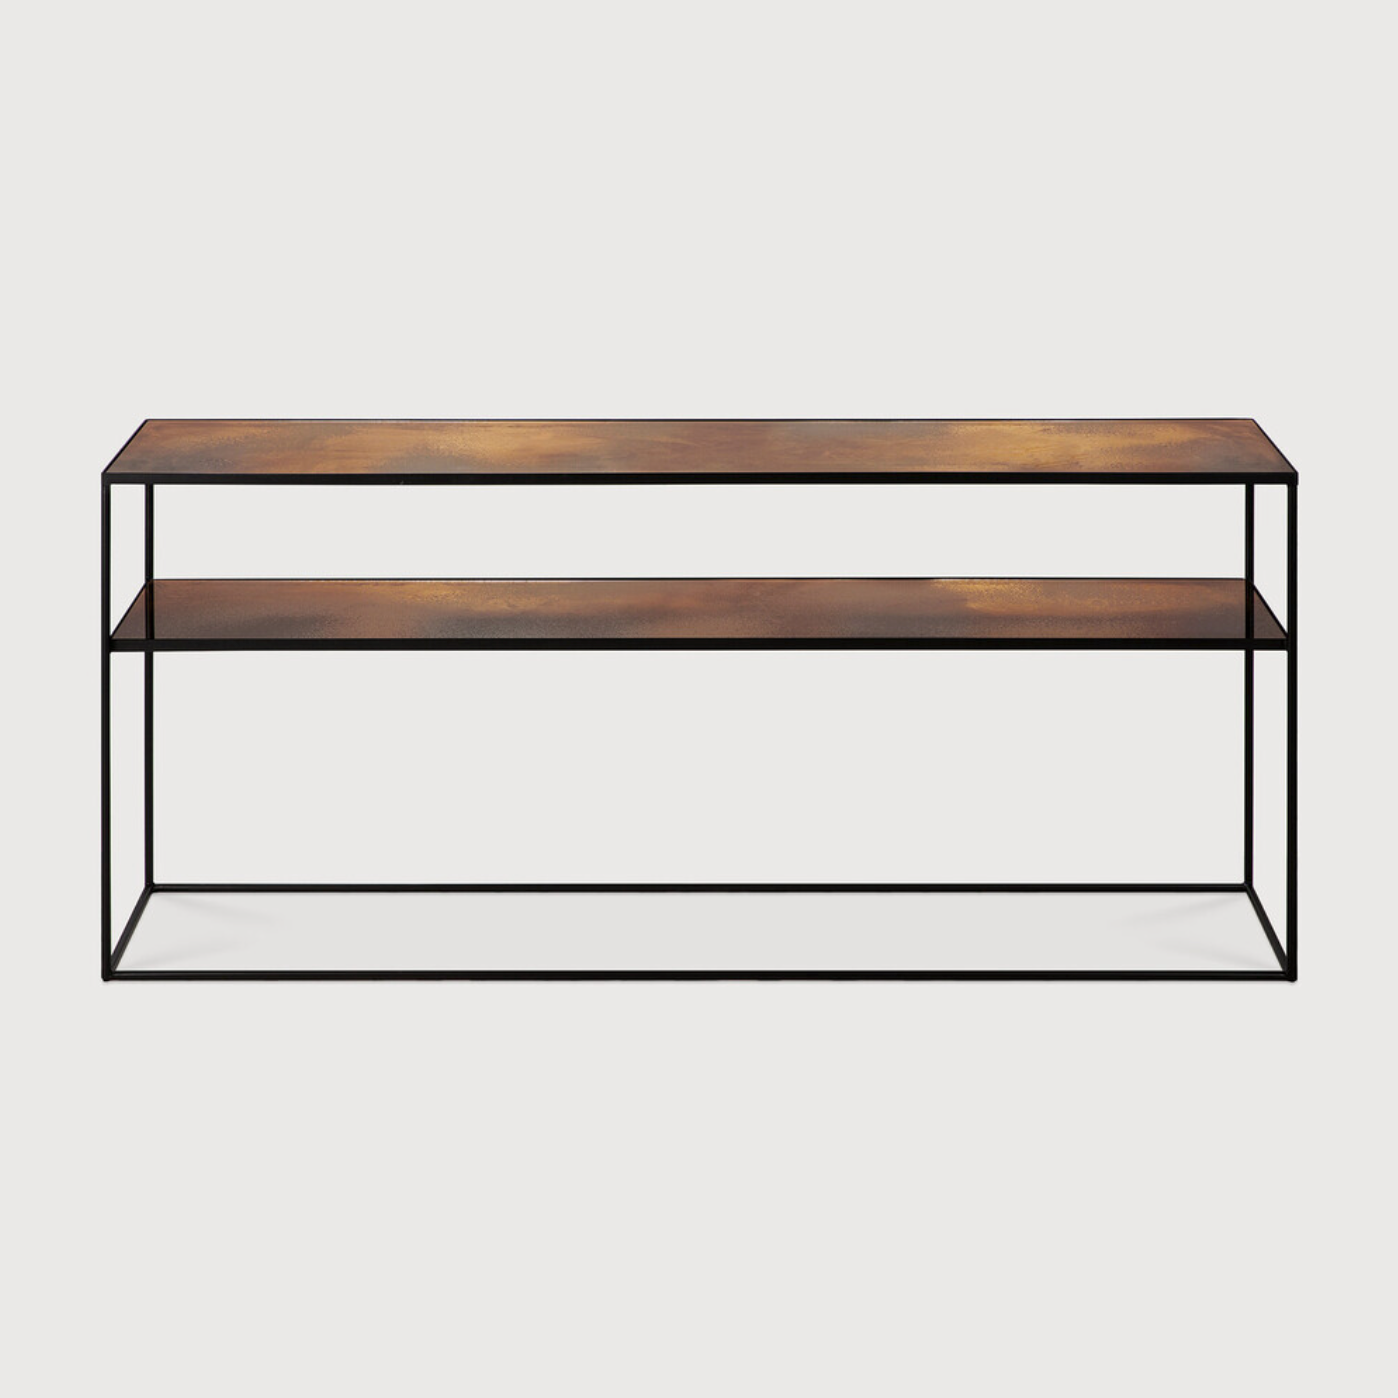 The sleek simplicity of the Bronze Sofa Console makes for a graceful addition to your home. Its large mirror surface is the perfect place to display a selection of your favorite souvenirs, eye-catchers or valet trays. We would place this versatile piece in an entry hall or living room space.  Dimensions: 63"w x 14.5"d x 28"h  Weight: 69 lbs  Material: Mirror top, black metal frame